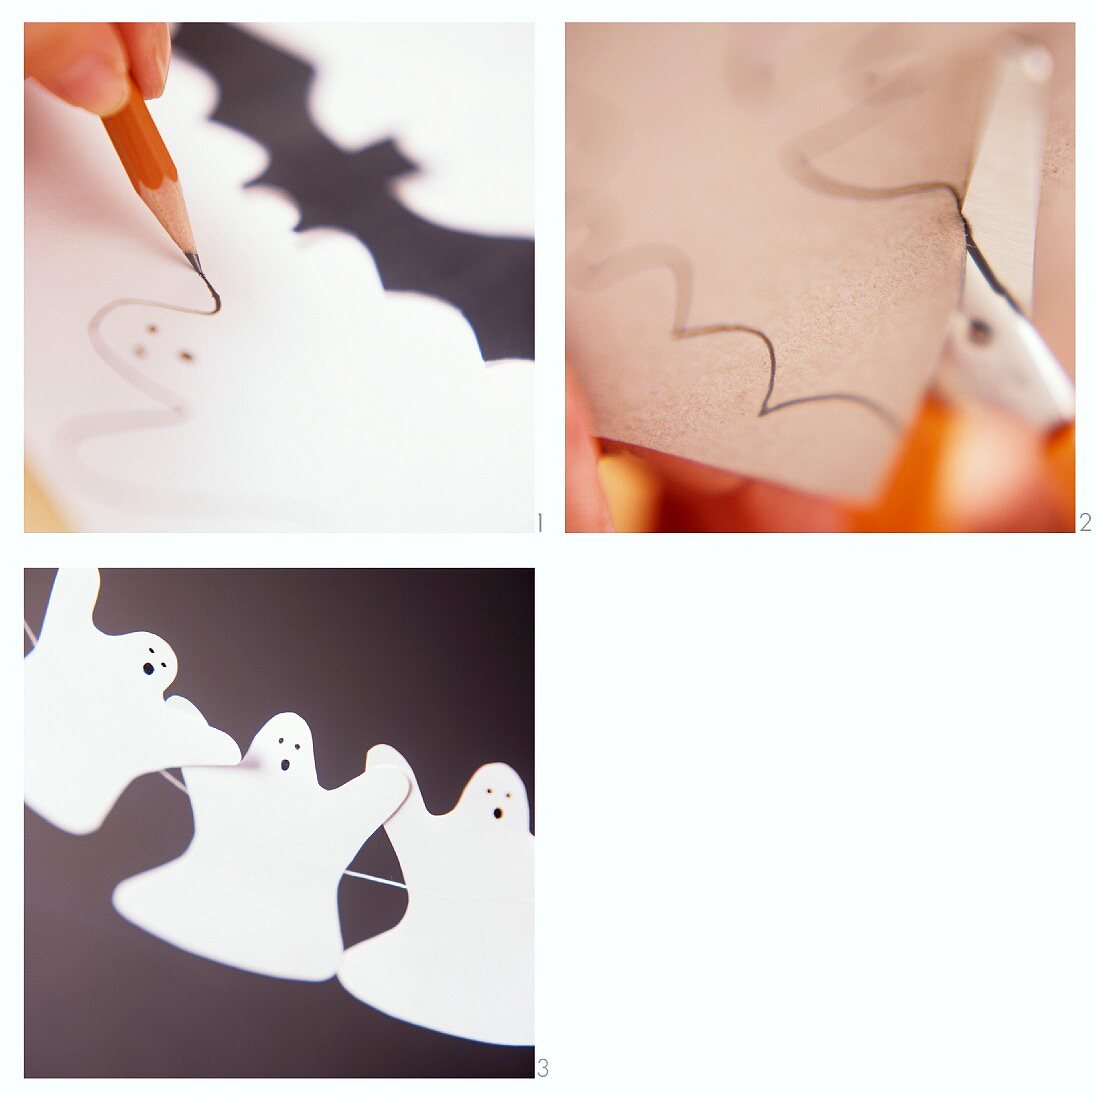 Making ghosts and bats as Halloween decorations